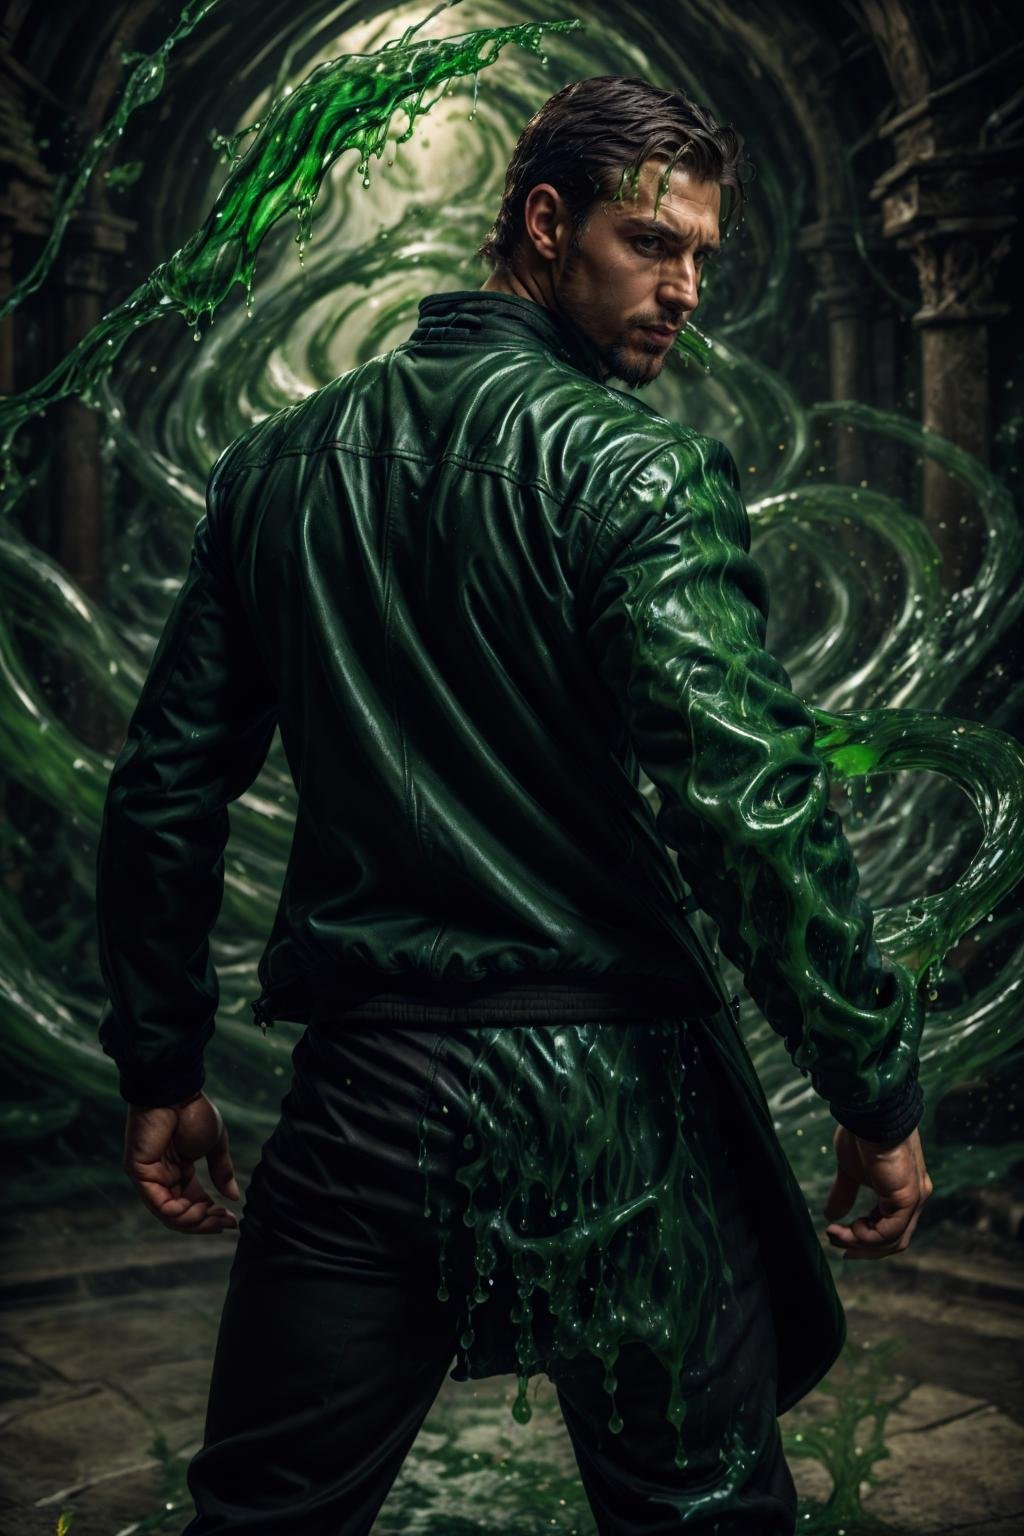 realistic, masterpiece, intricate details, detailed background, depth of field, photo of a handsome (british man), ven0mancer, dynamic pose, (jacket), (pants), from behind, venom liquid, close up, face portrait, swirling green liquid,